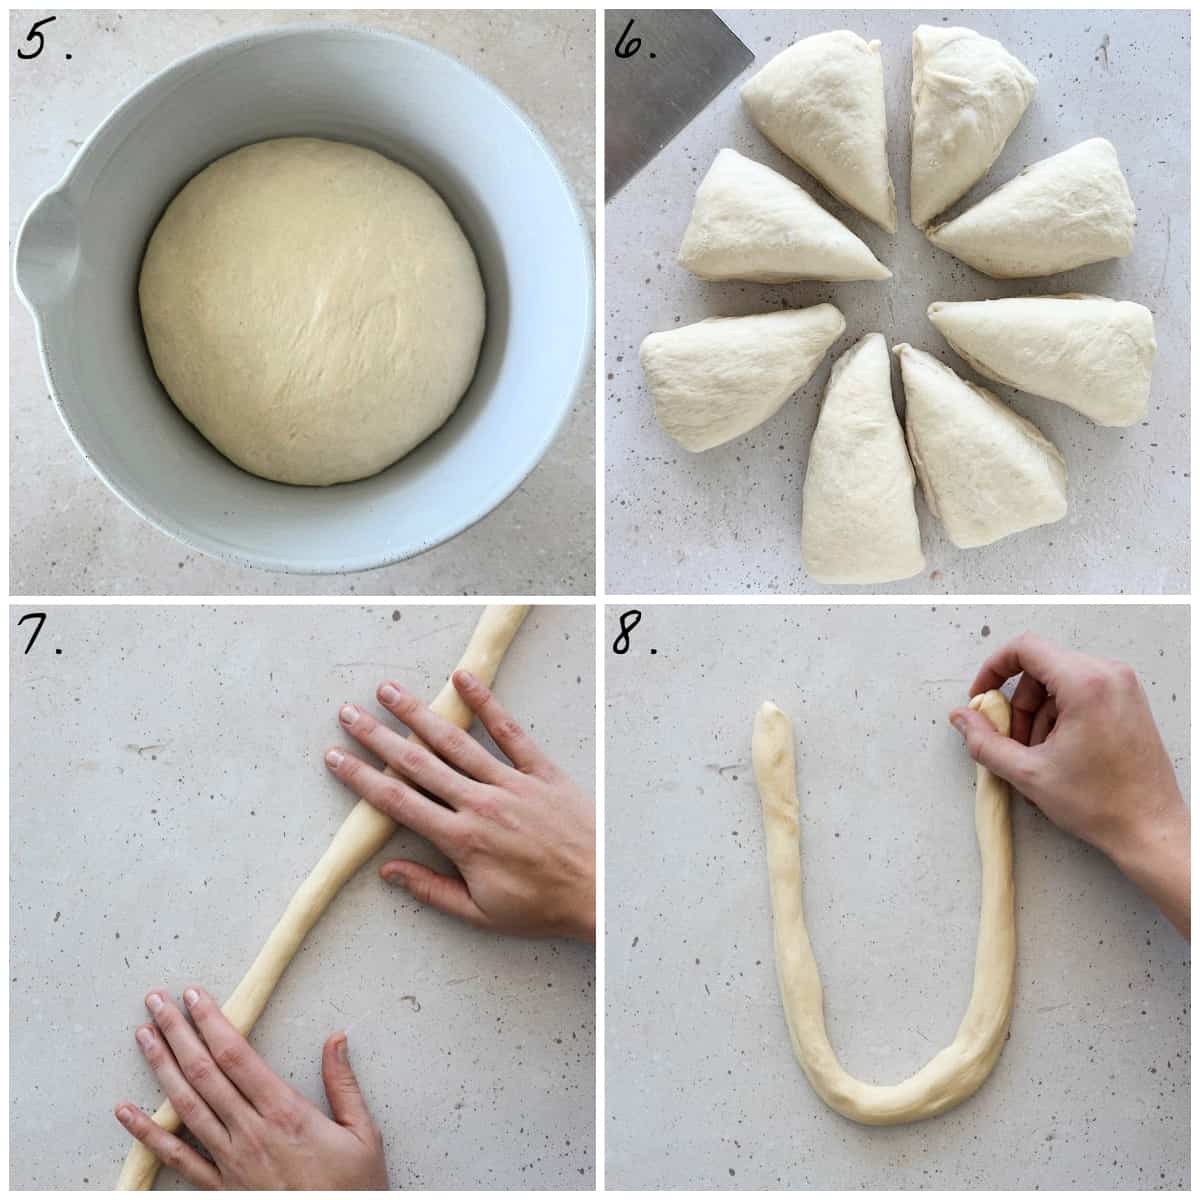 Four process photos showing how to divide the dough and start shaping it in to pretzels. 